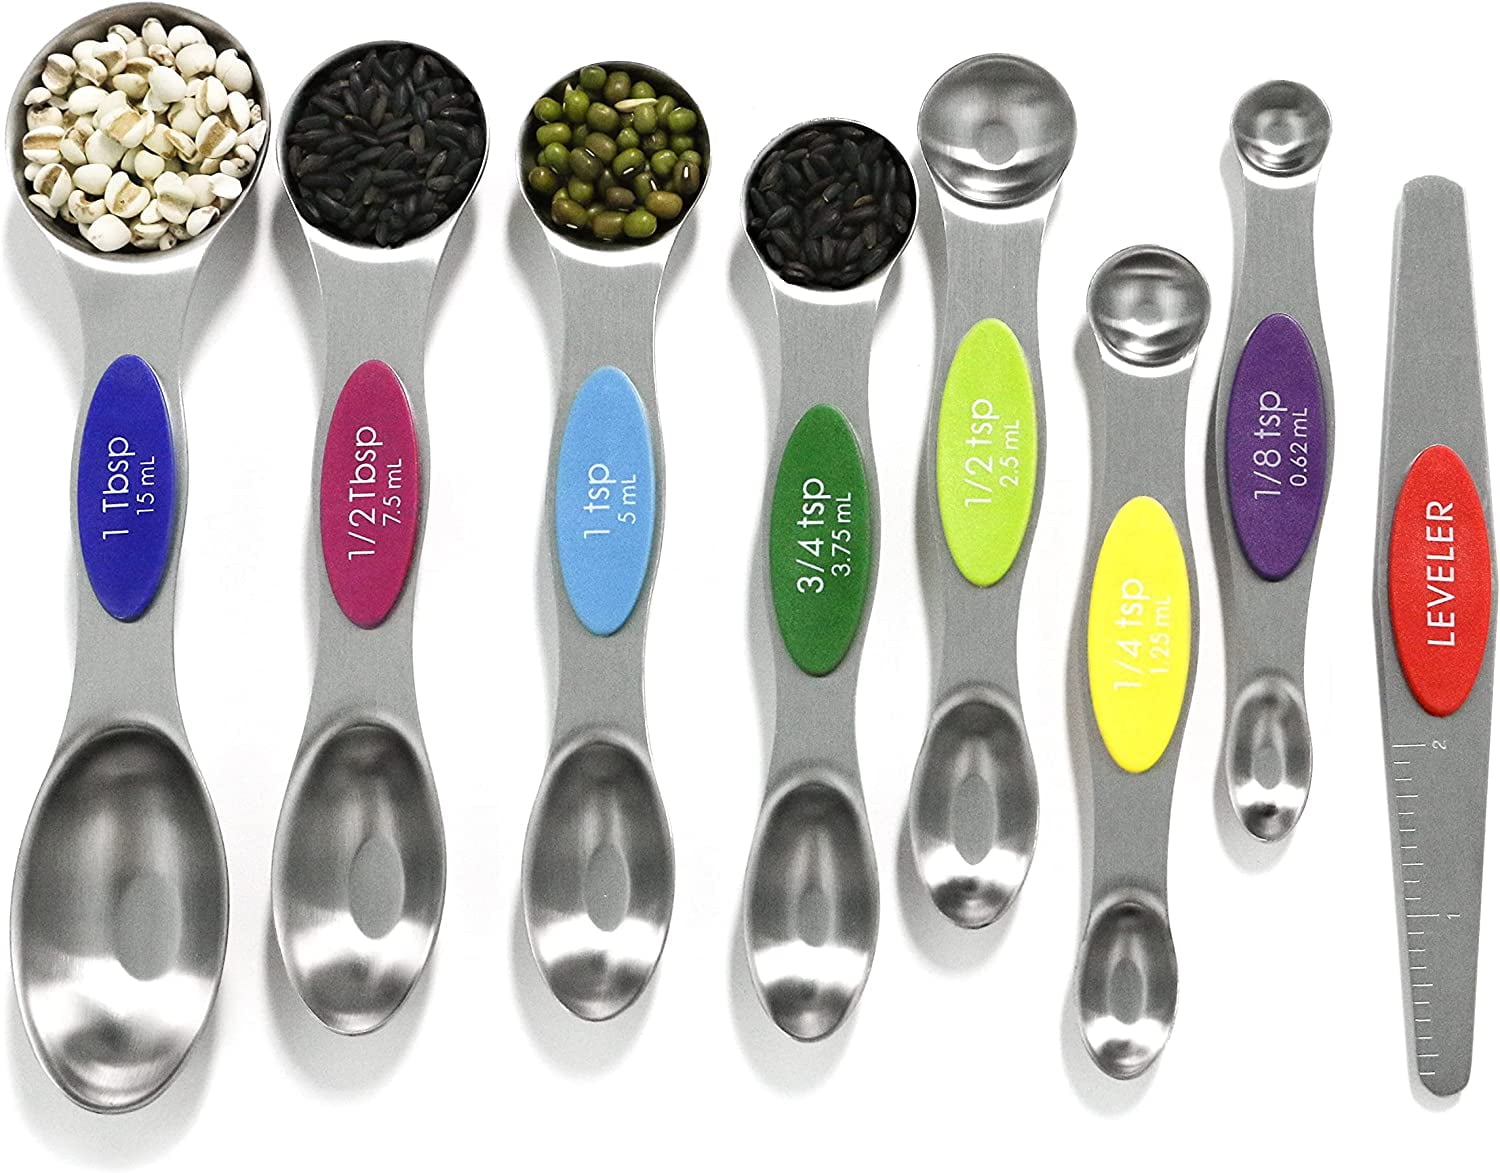 LIFETOWE Stainless Steel Measuring Cups and Spoons Set of 15 - Includes 7  Nesting Metal Measuring Cups, 8 Magnetic Measuring Spoons set - Ideal